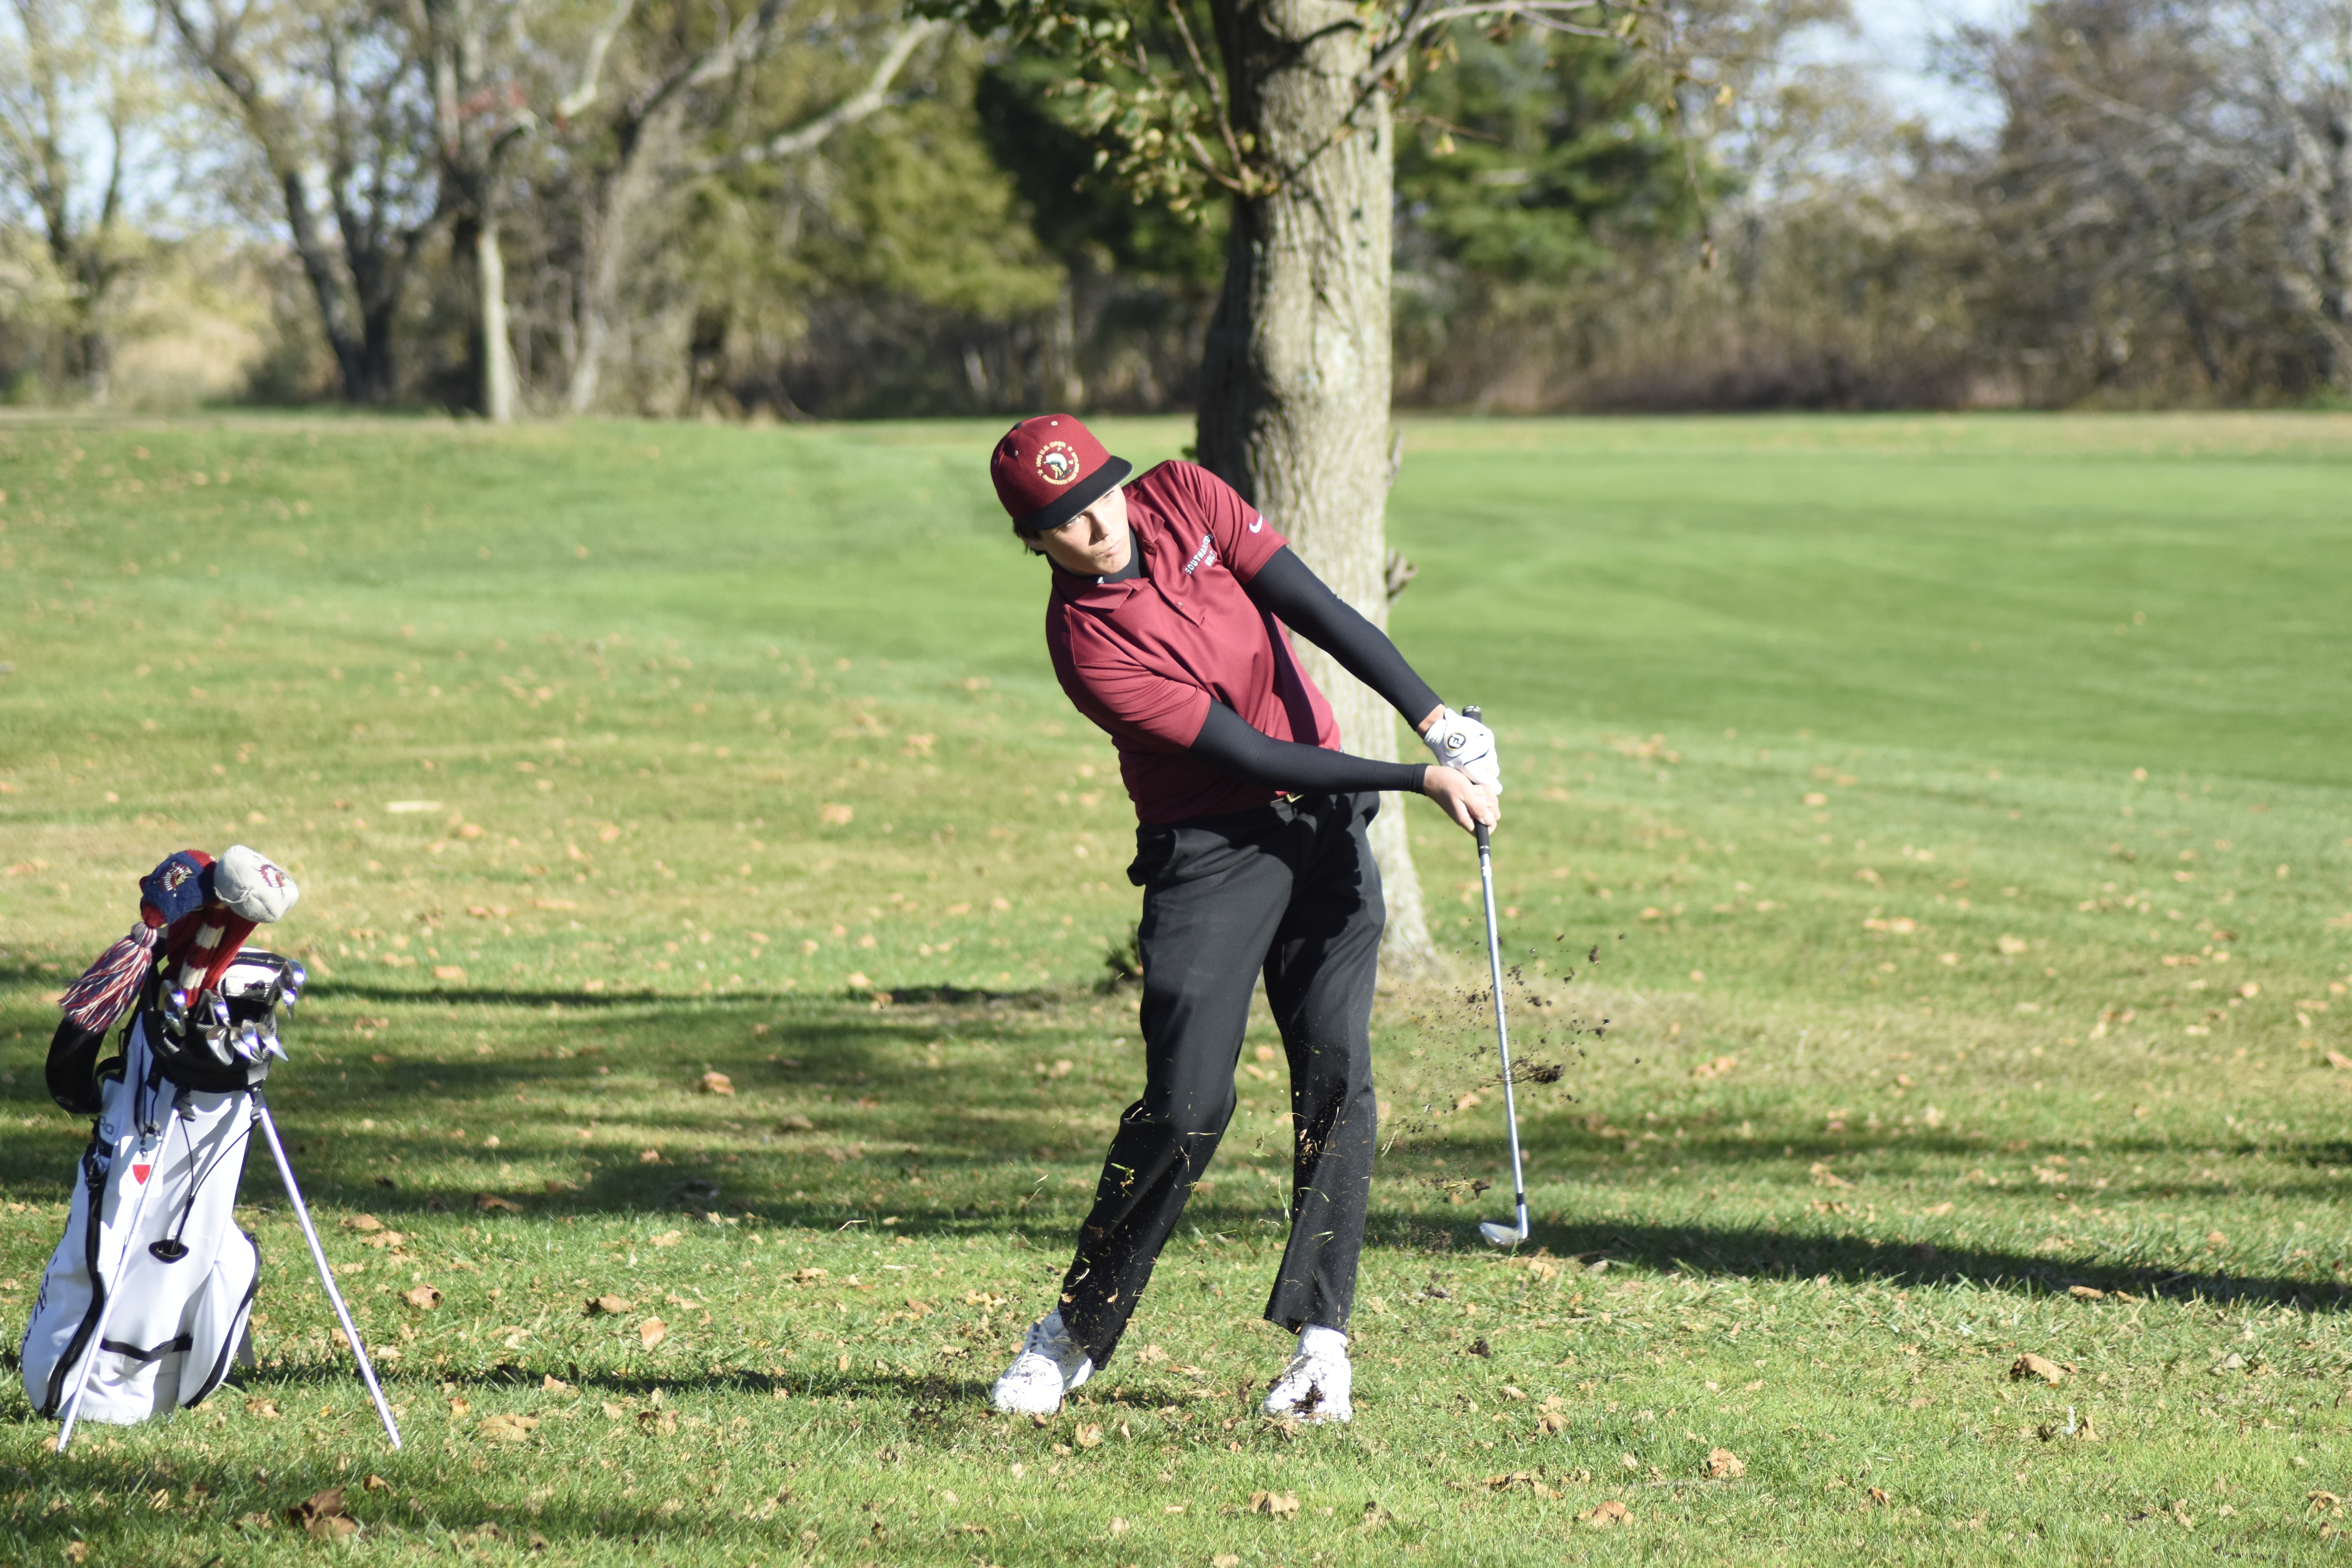 Southampton's Jack Blackmore tees off at the 10th hole at Indian Island Golf Club in Riverhead at the start of the quarterfinal match between the Mariners and Hurricanes on Thursday, Ocotber 24.